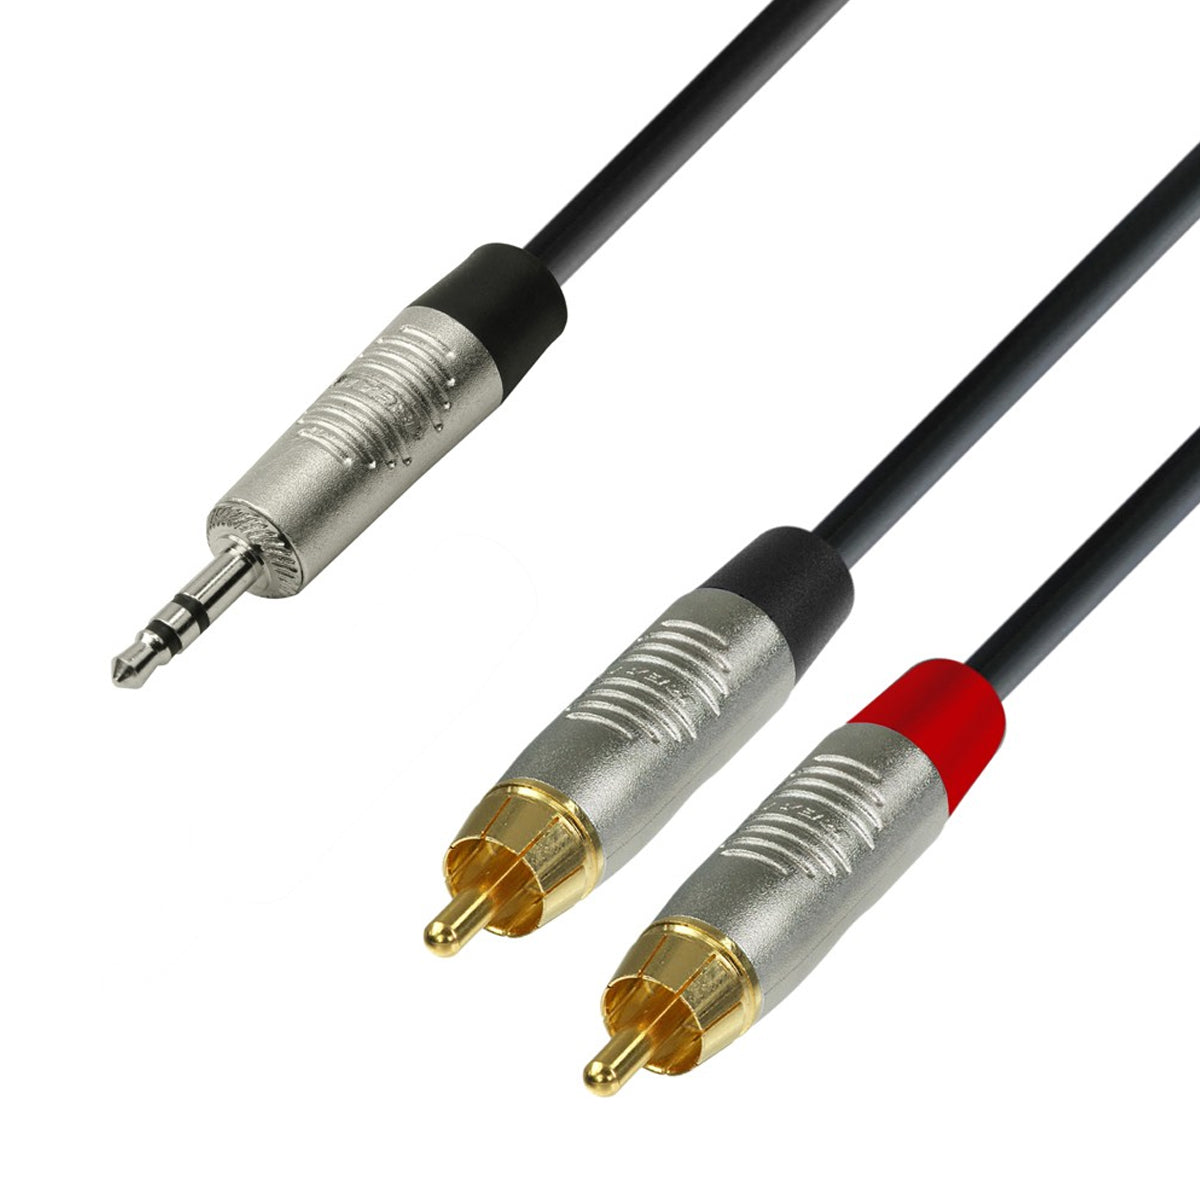 Adam Hall Cables K4 YWCC 0300 - Audio Cable REAN 3.5mm Jack stereo to 2 x RCA male 3m